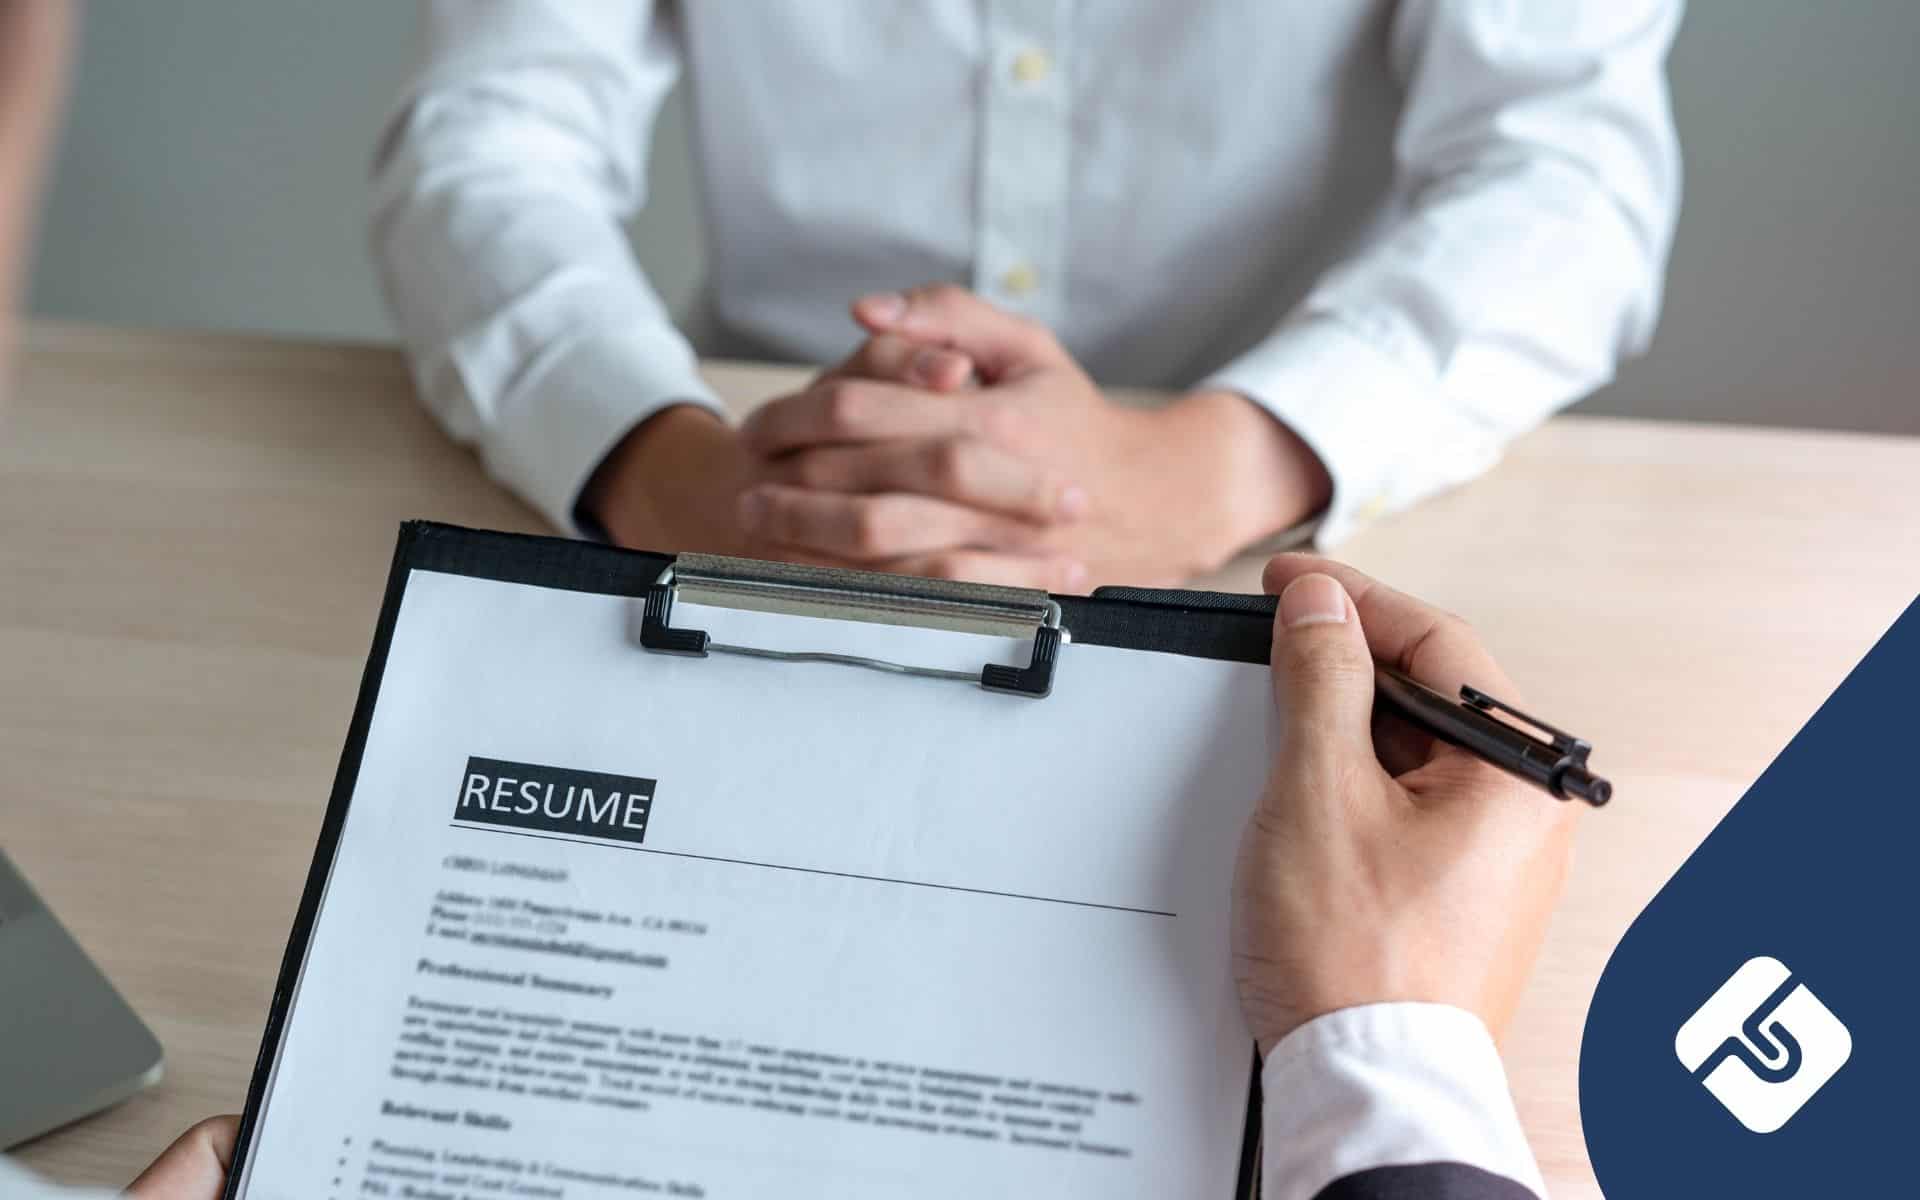 Hiring Employees? Here's 5 Resume Red Flags to Look Out for